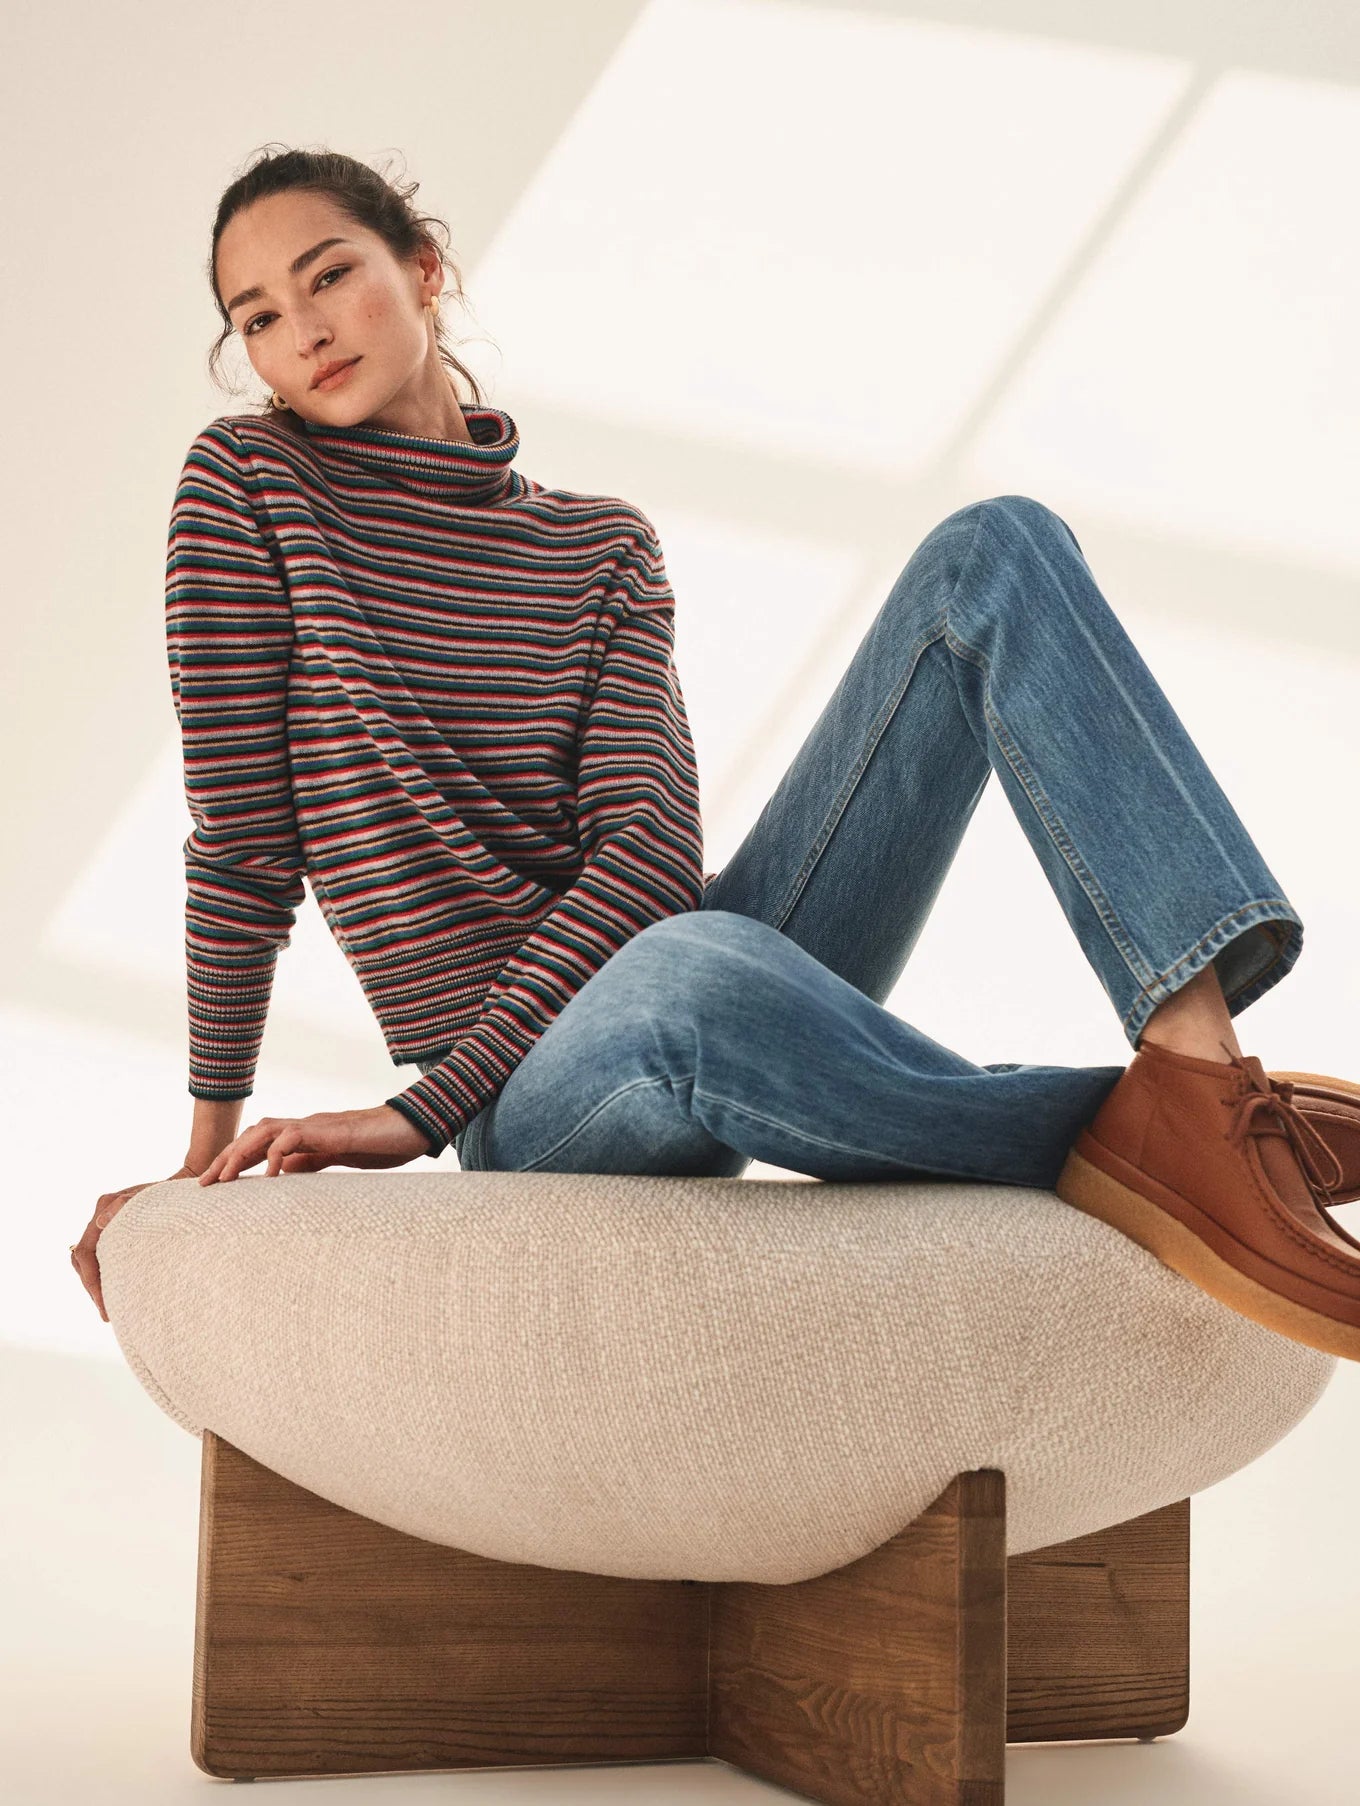 Cashmere Striped Turtleneck in Rainbow Combo